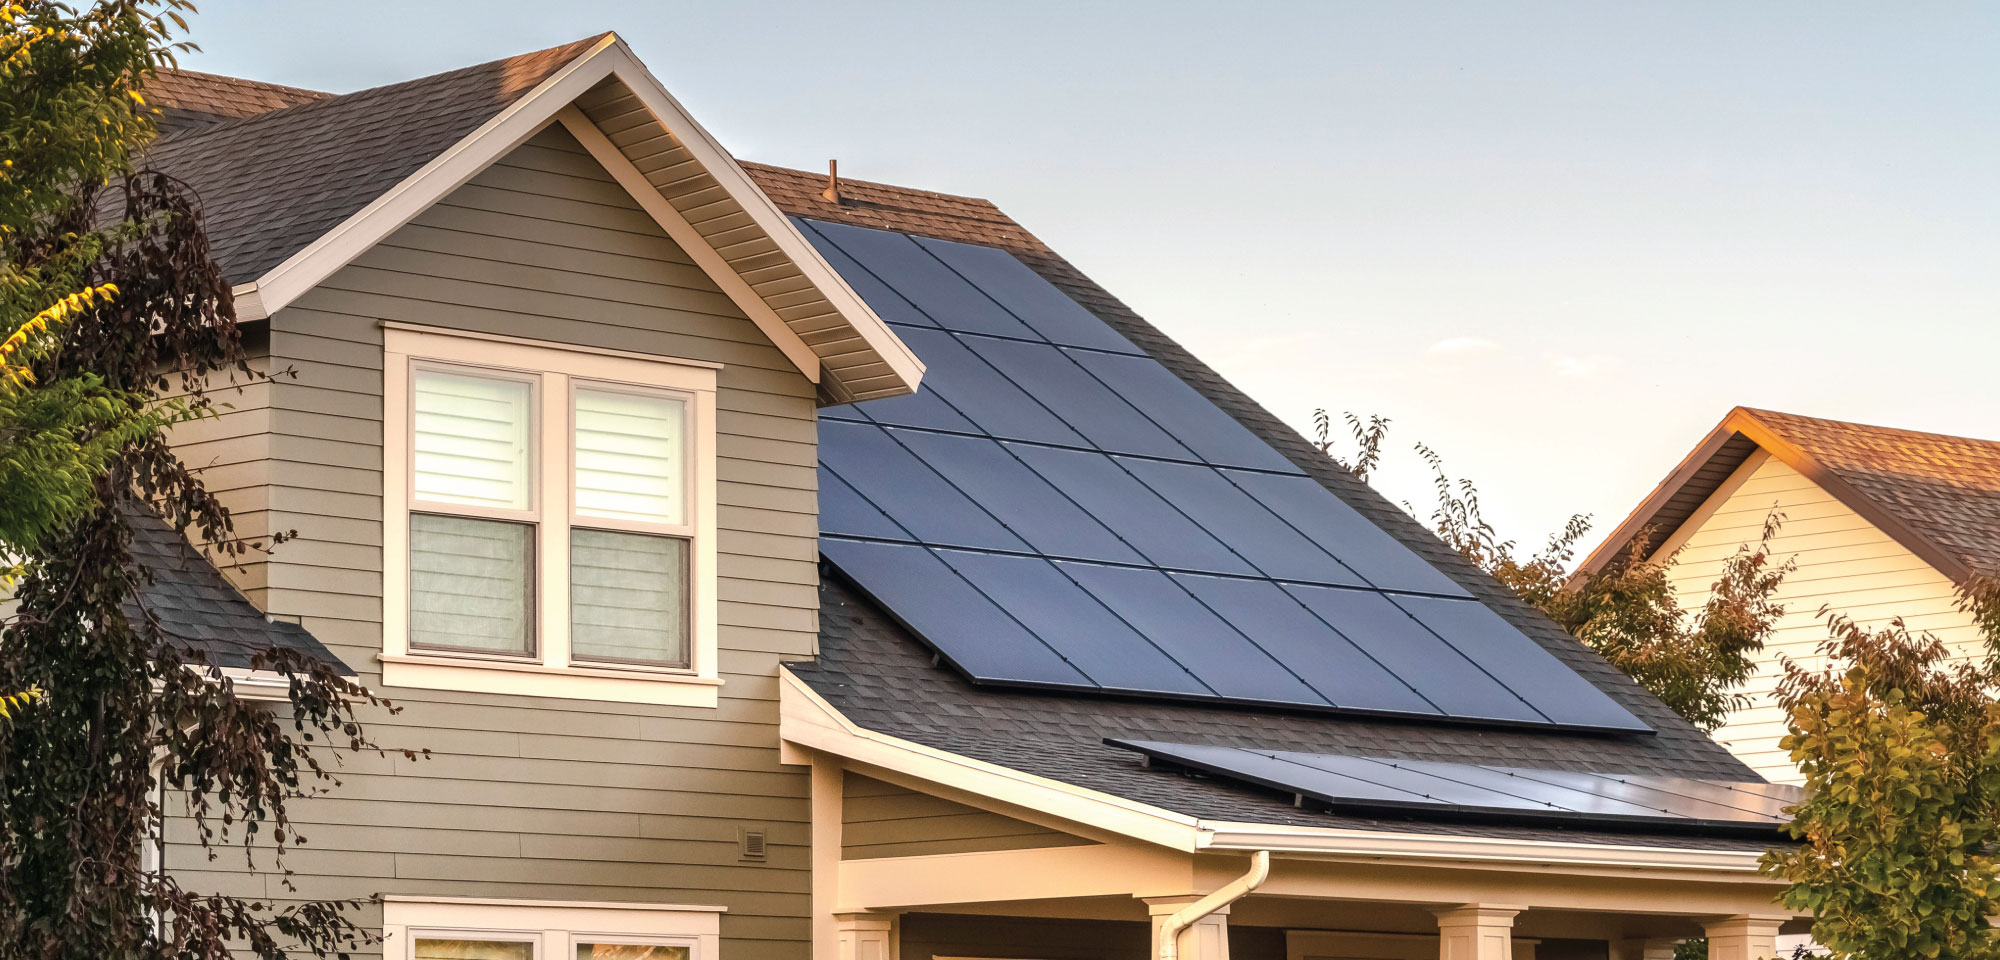 Are free solar panels actually free?